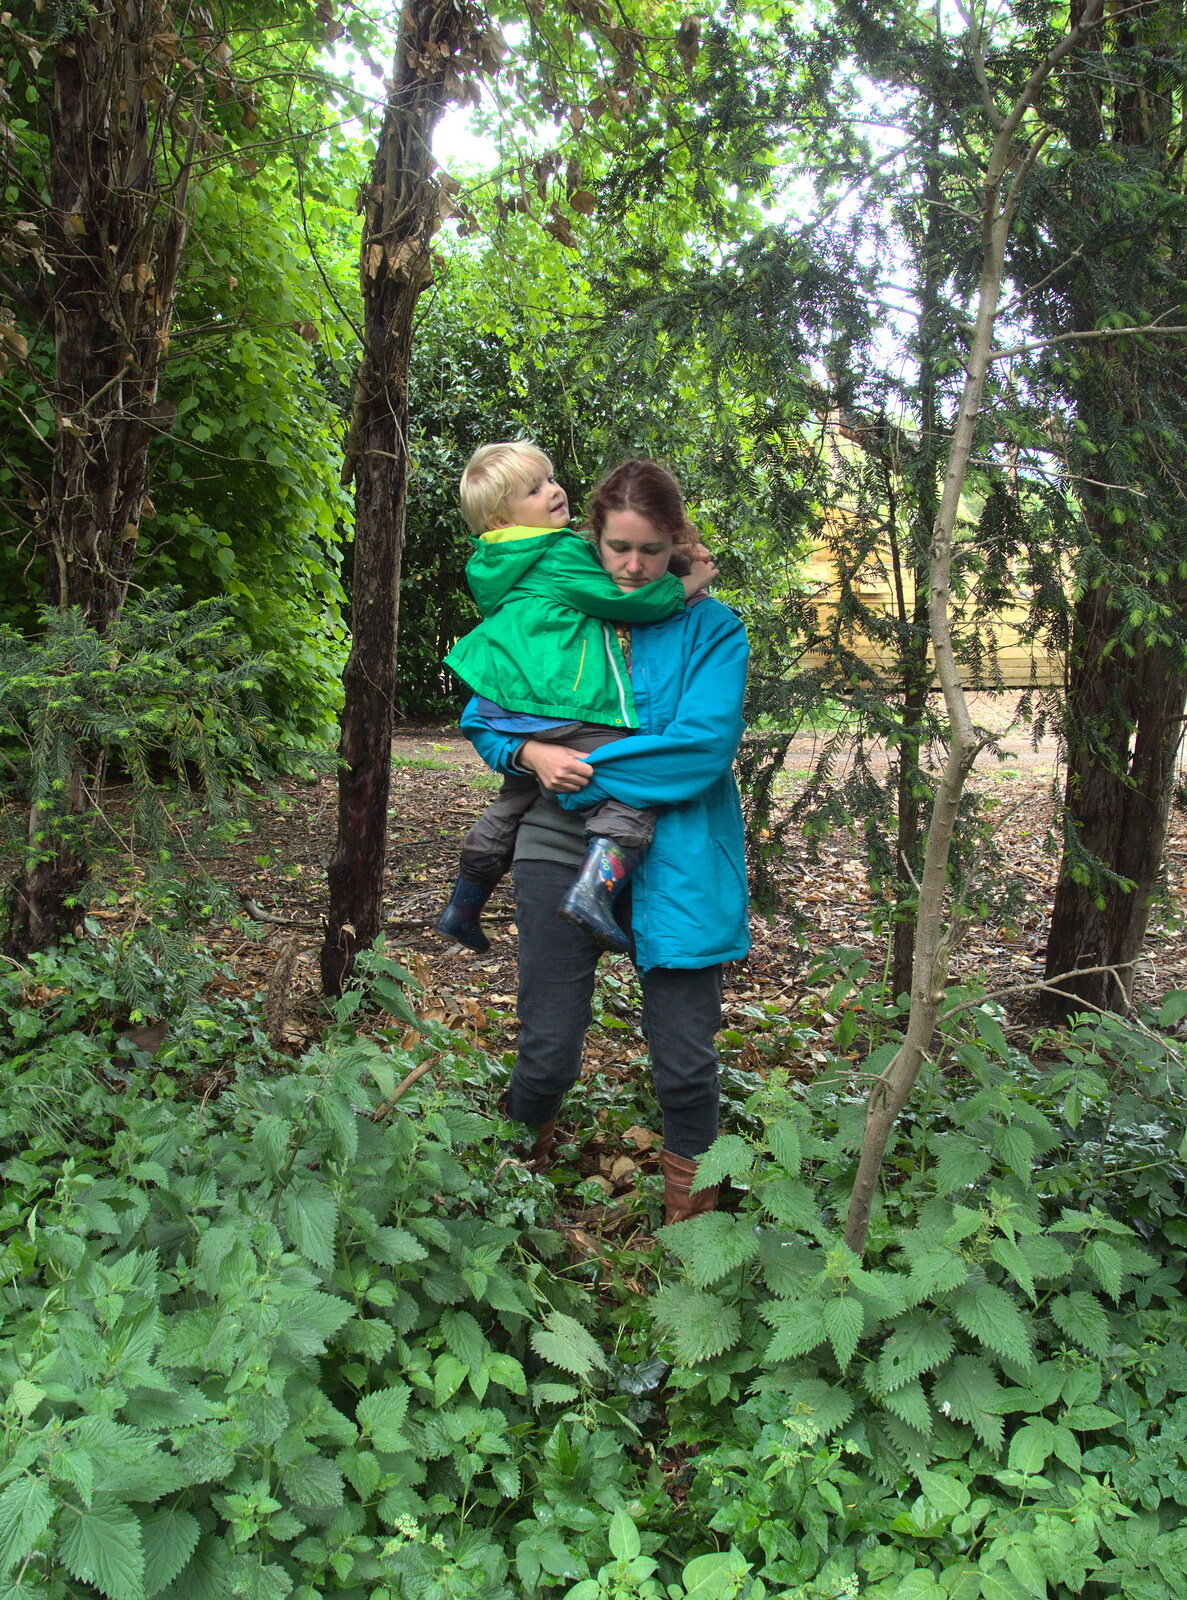 Isobel carries Harry through the nettles from Thursday BSCC Bike Rides, Thelnetham and Earl Soham, Suffolk - 31st May 2015